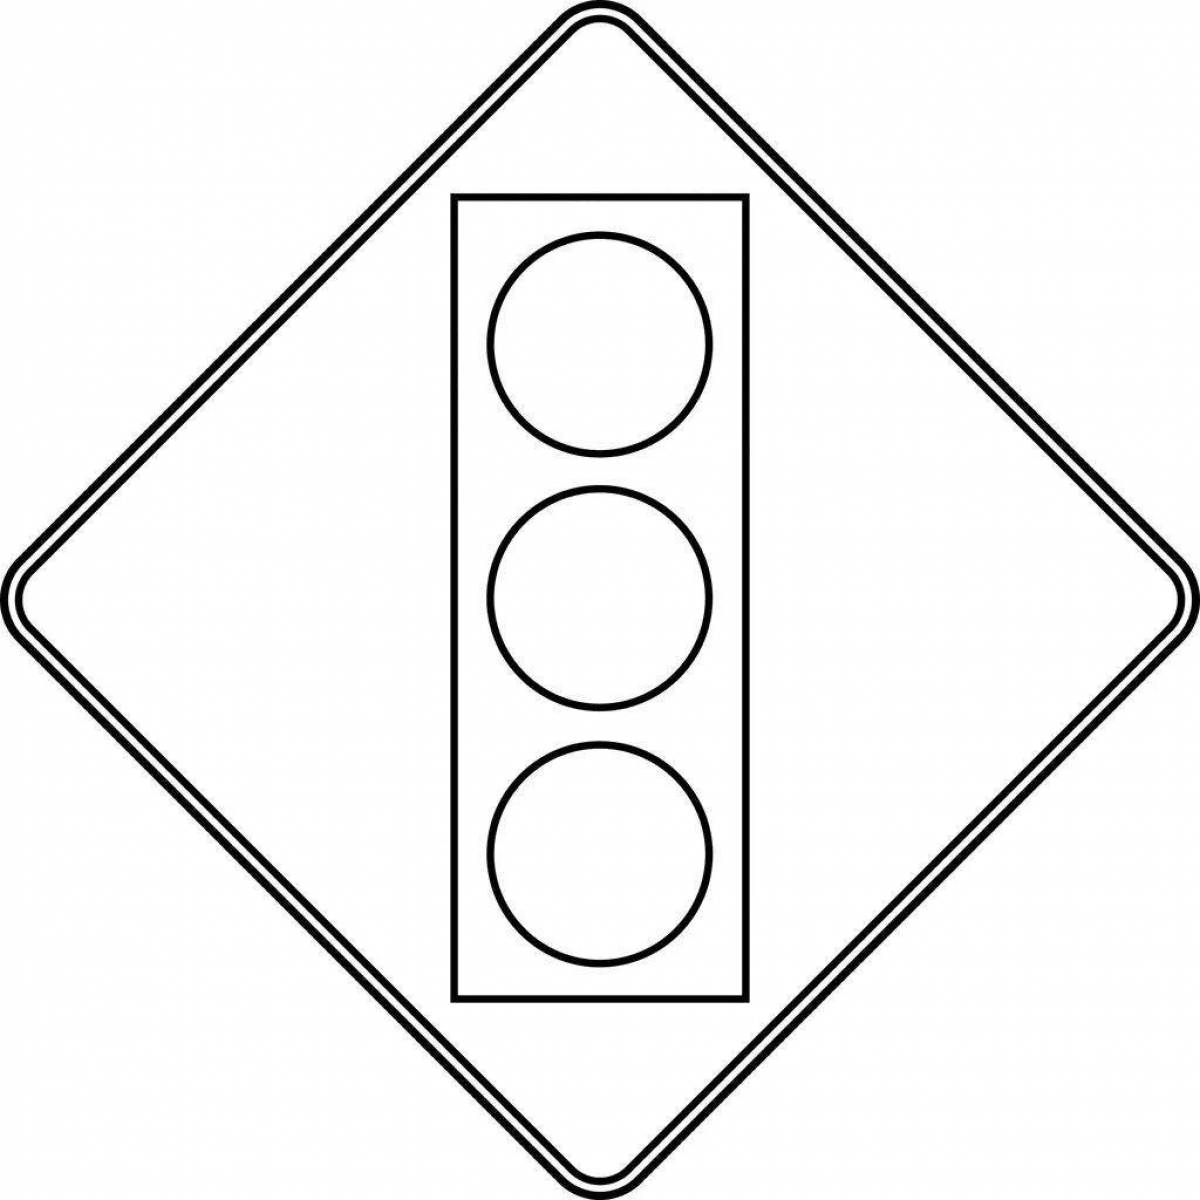 Traffic signs for preschoolers #8